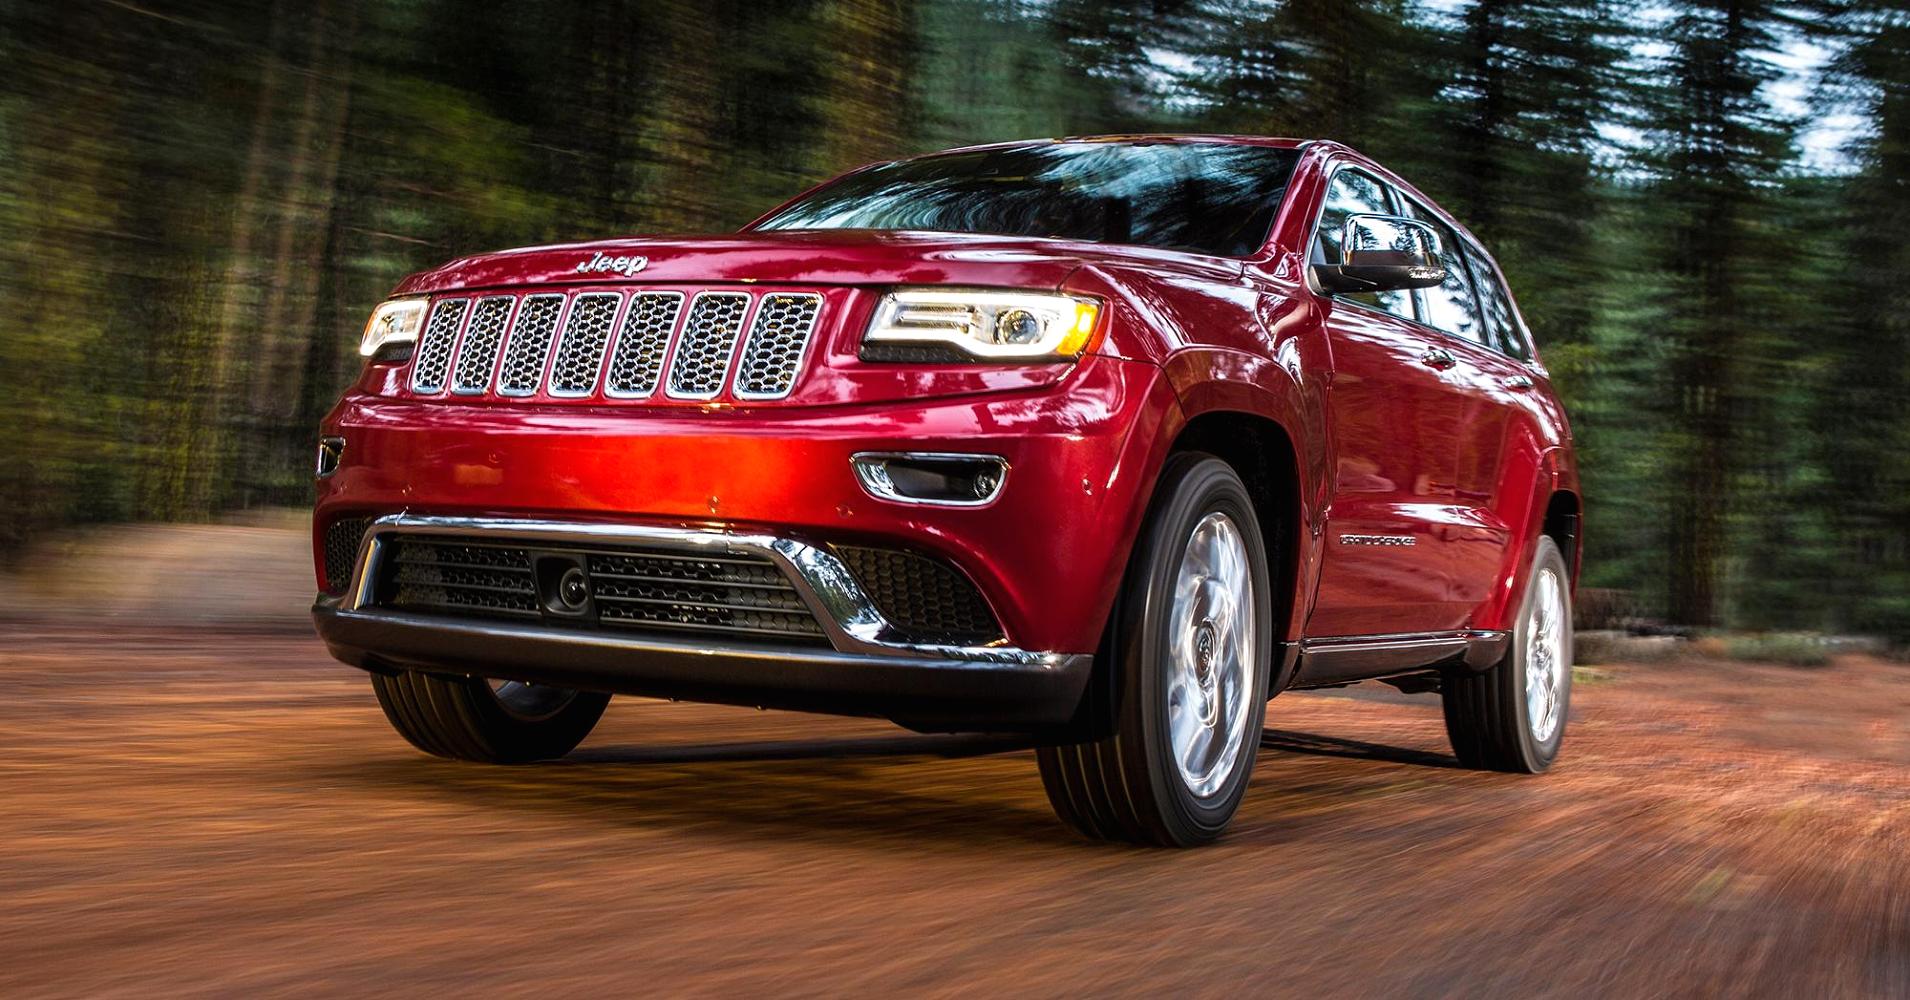 Fiat Chrysler recalls 4.8 million vehicles, citing cruise control issues, shares fall ...